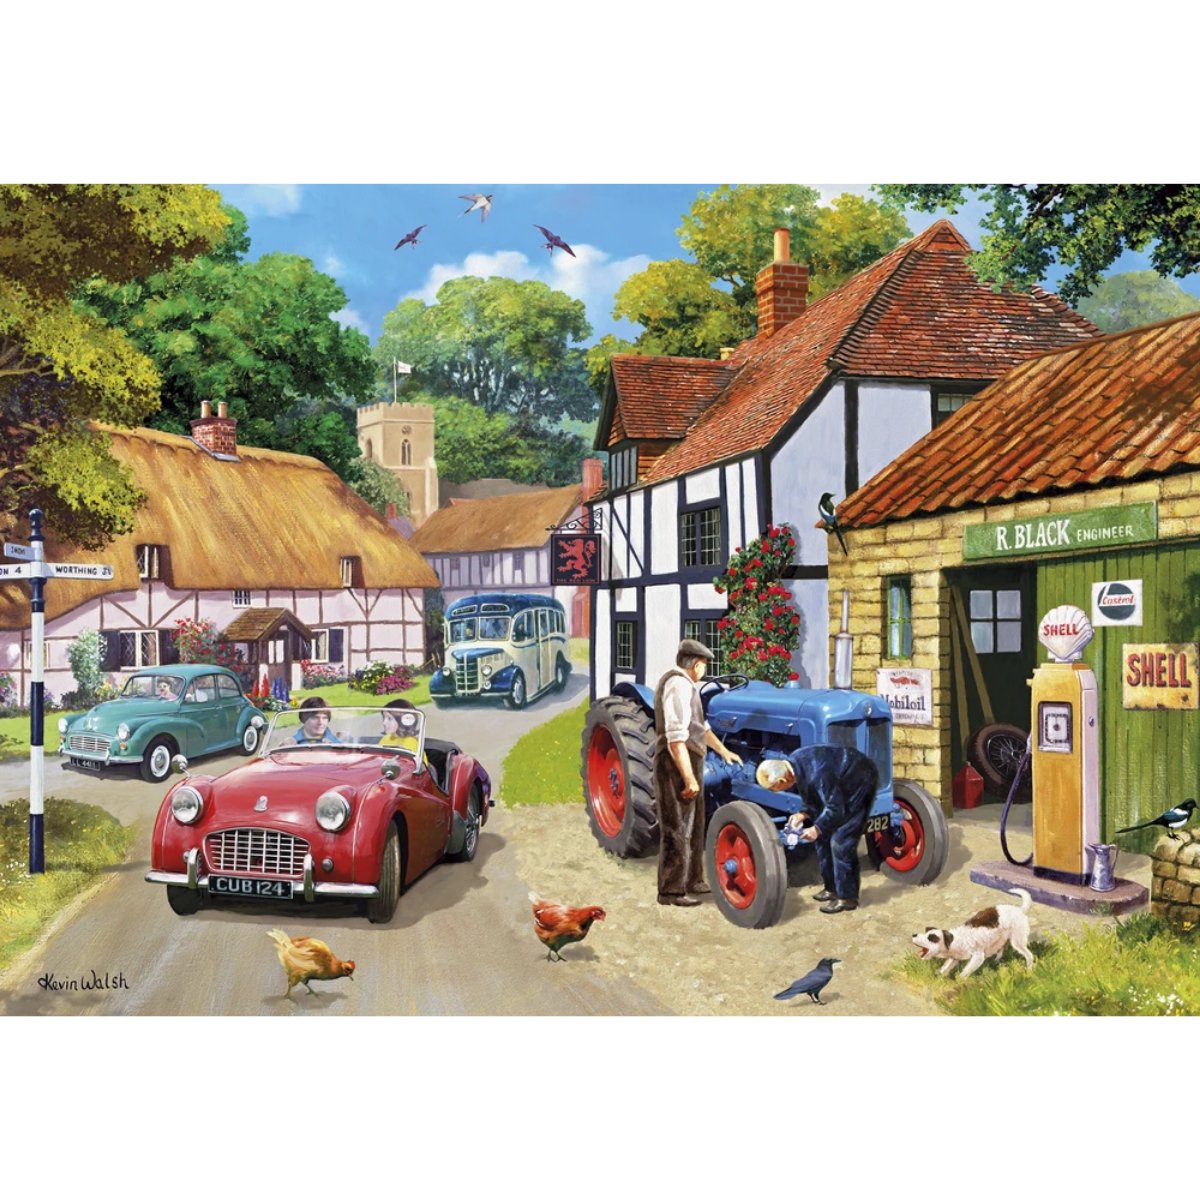 Gibsons Running Repairs Jigsaw Puzzle (100XXL Pieces)